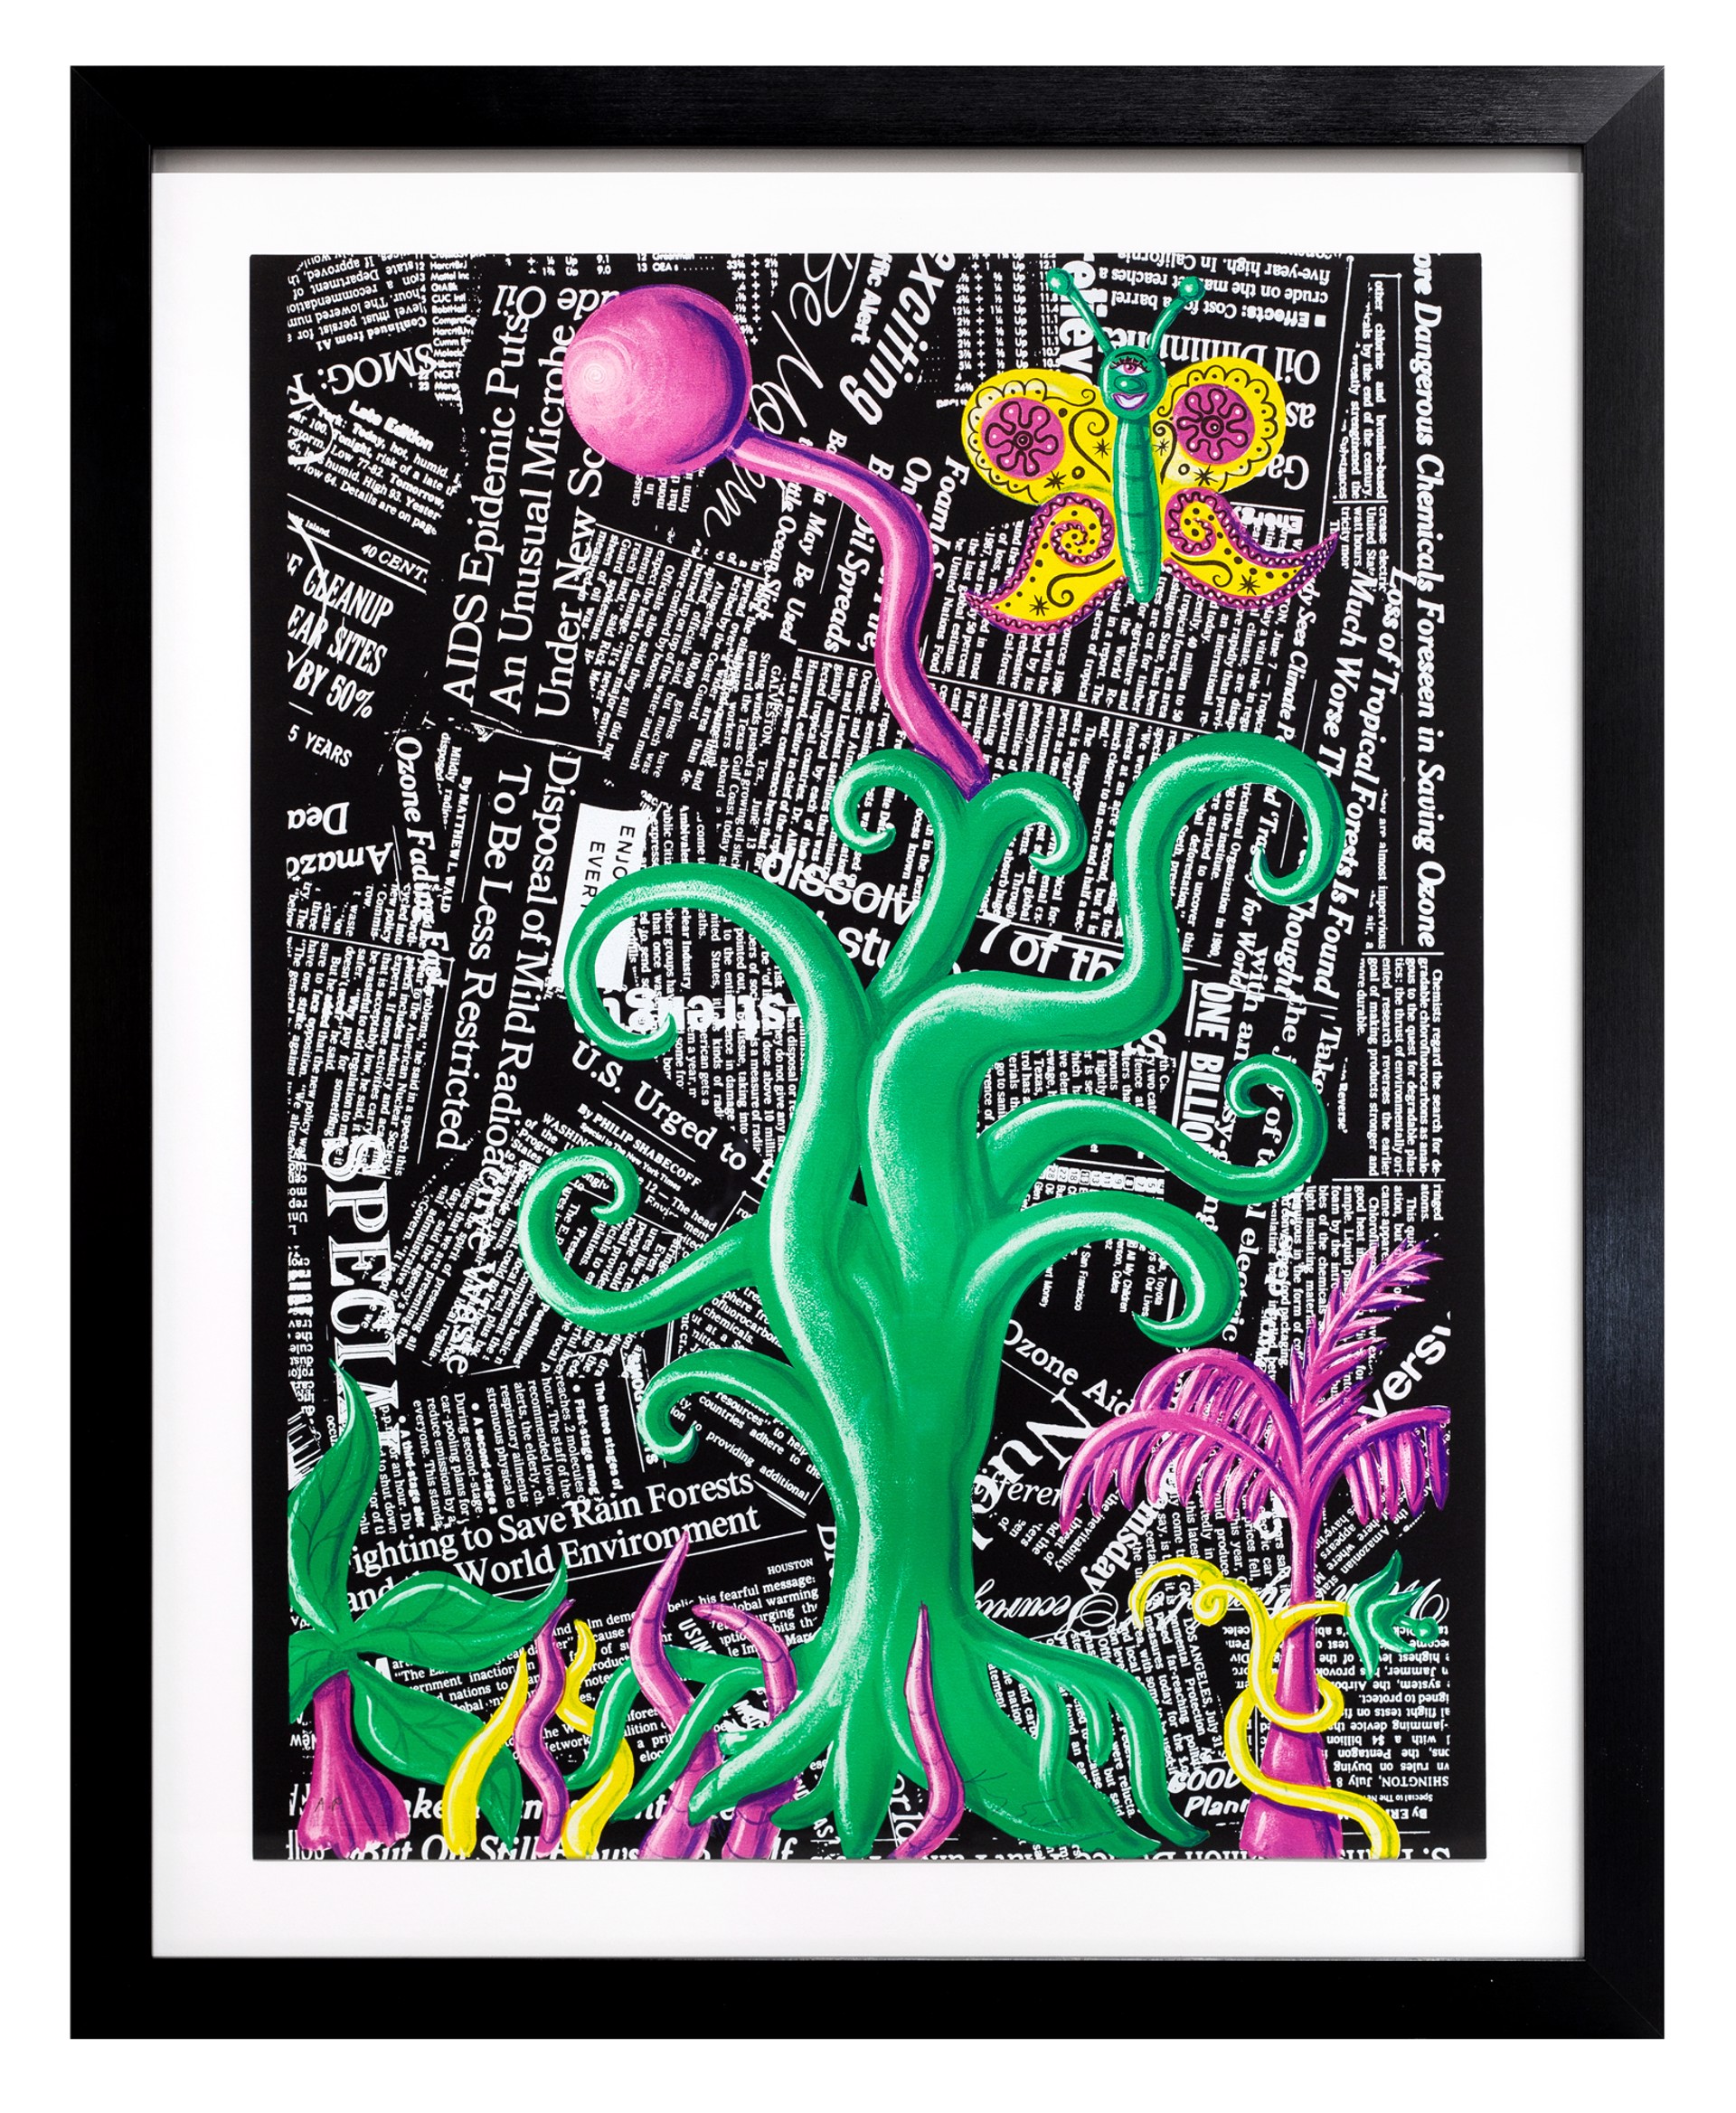 In search of a new tomorrow-From Columbus by Kenny Scharf